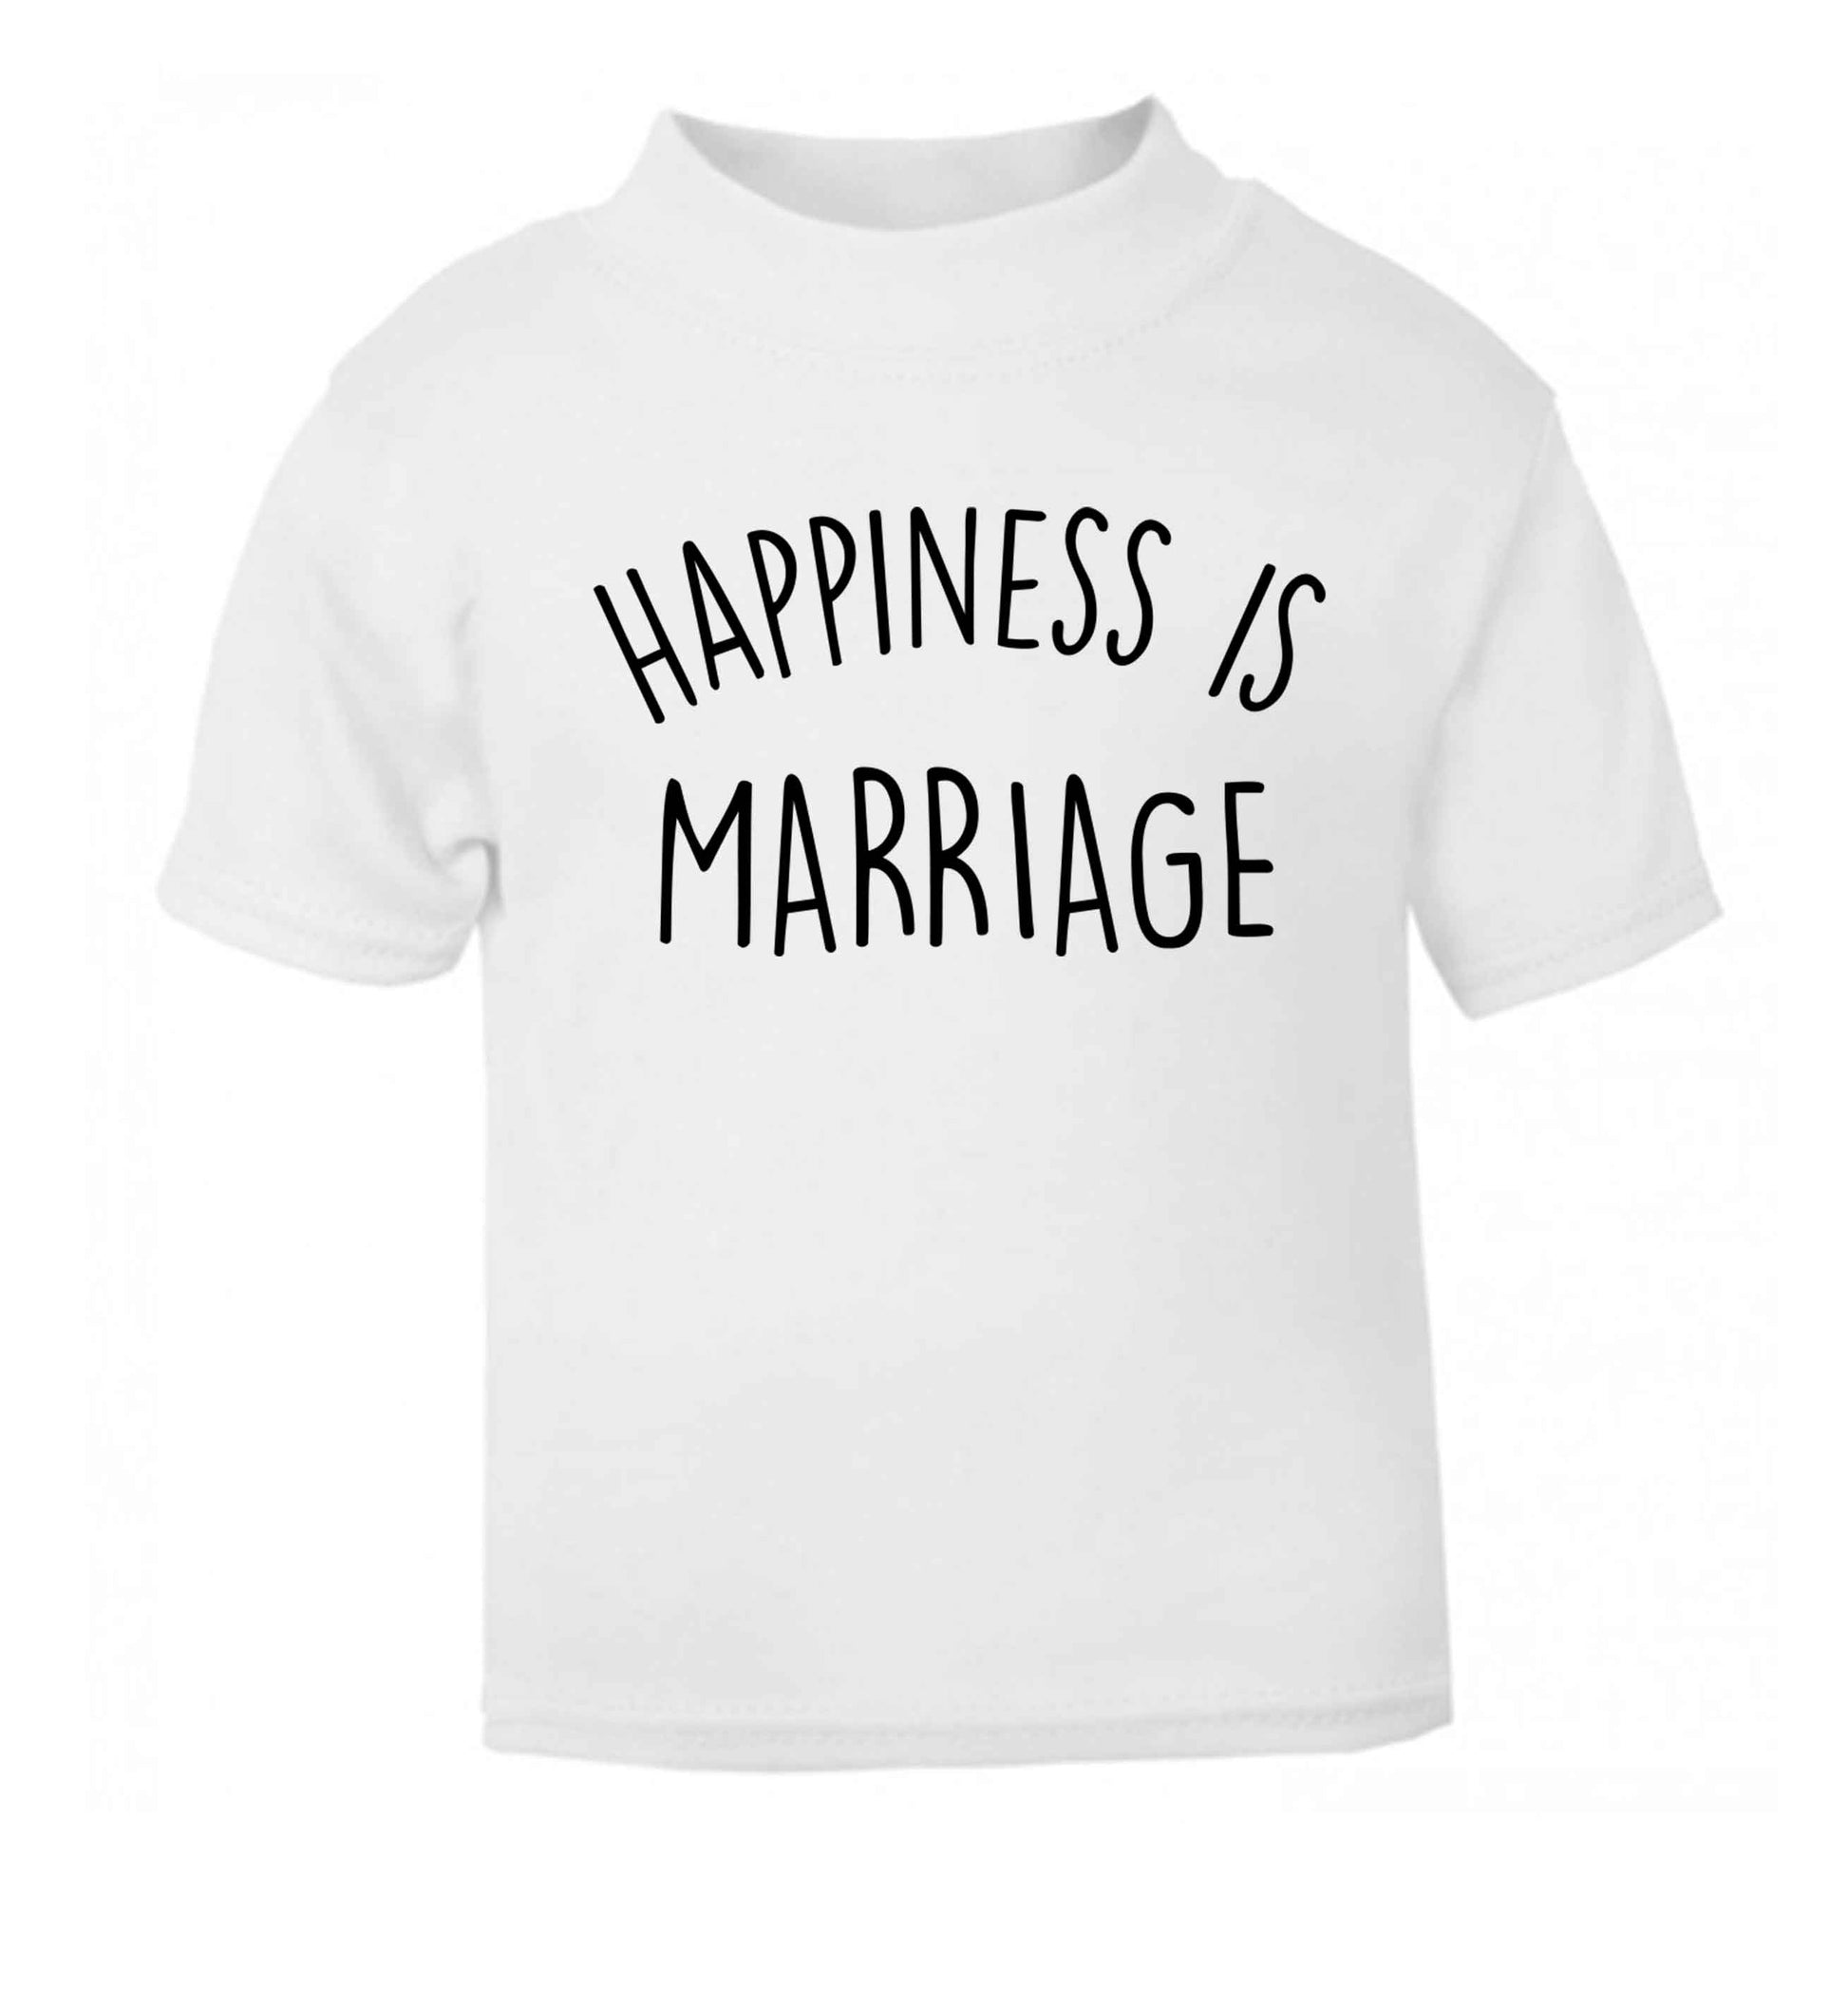 Happiness is wedding planning white baby toddler Tshirt 2 Years